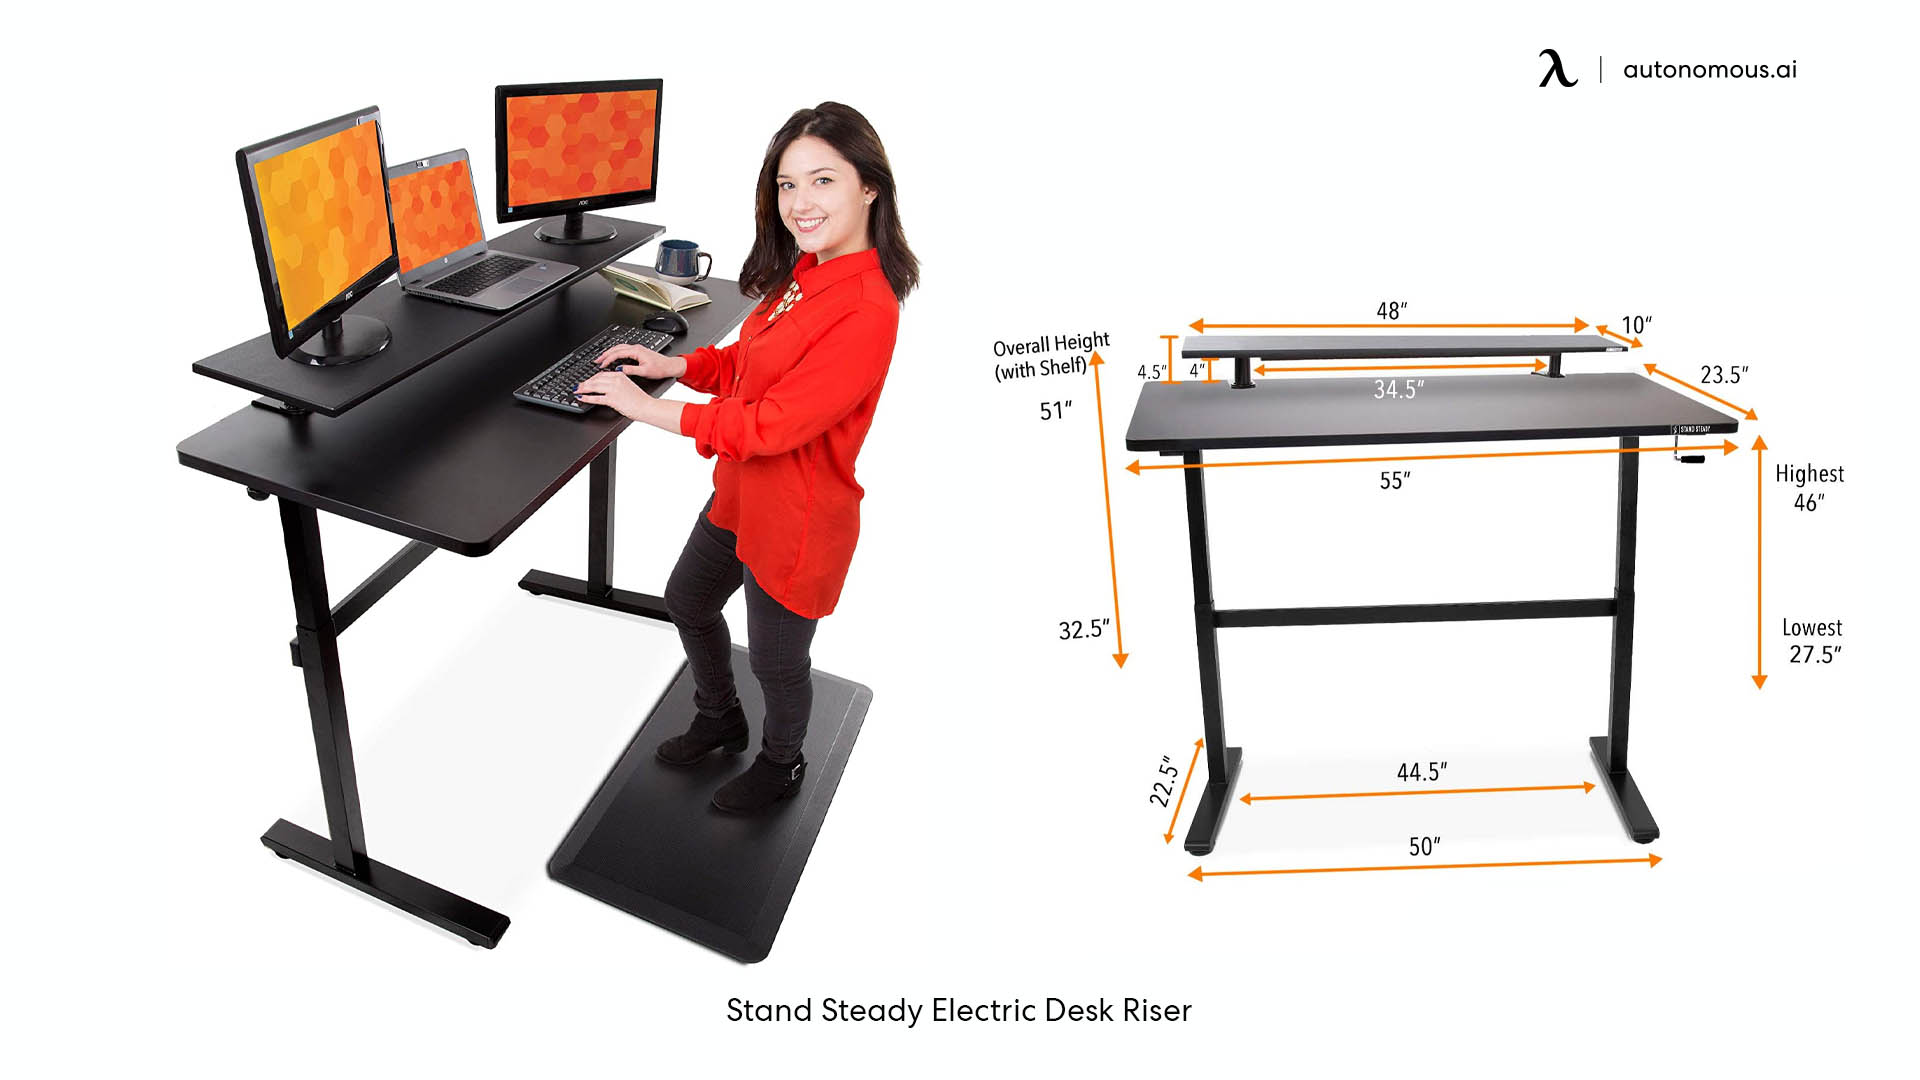 Stand Steady Electric Desk Riser